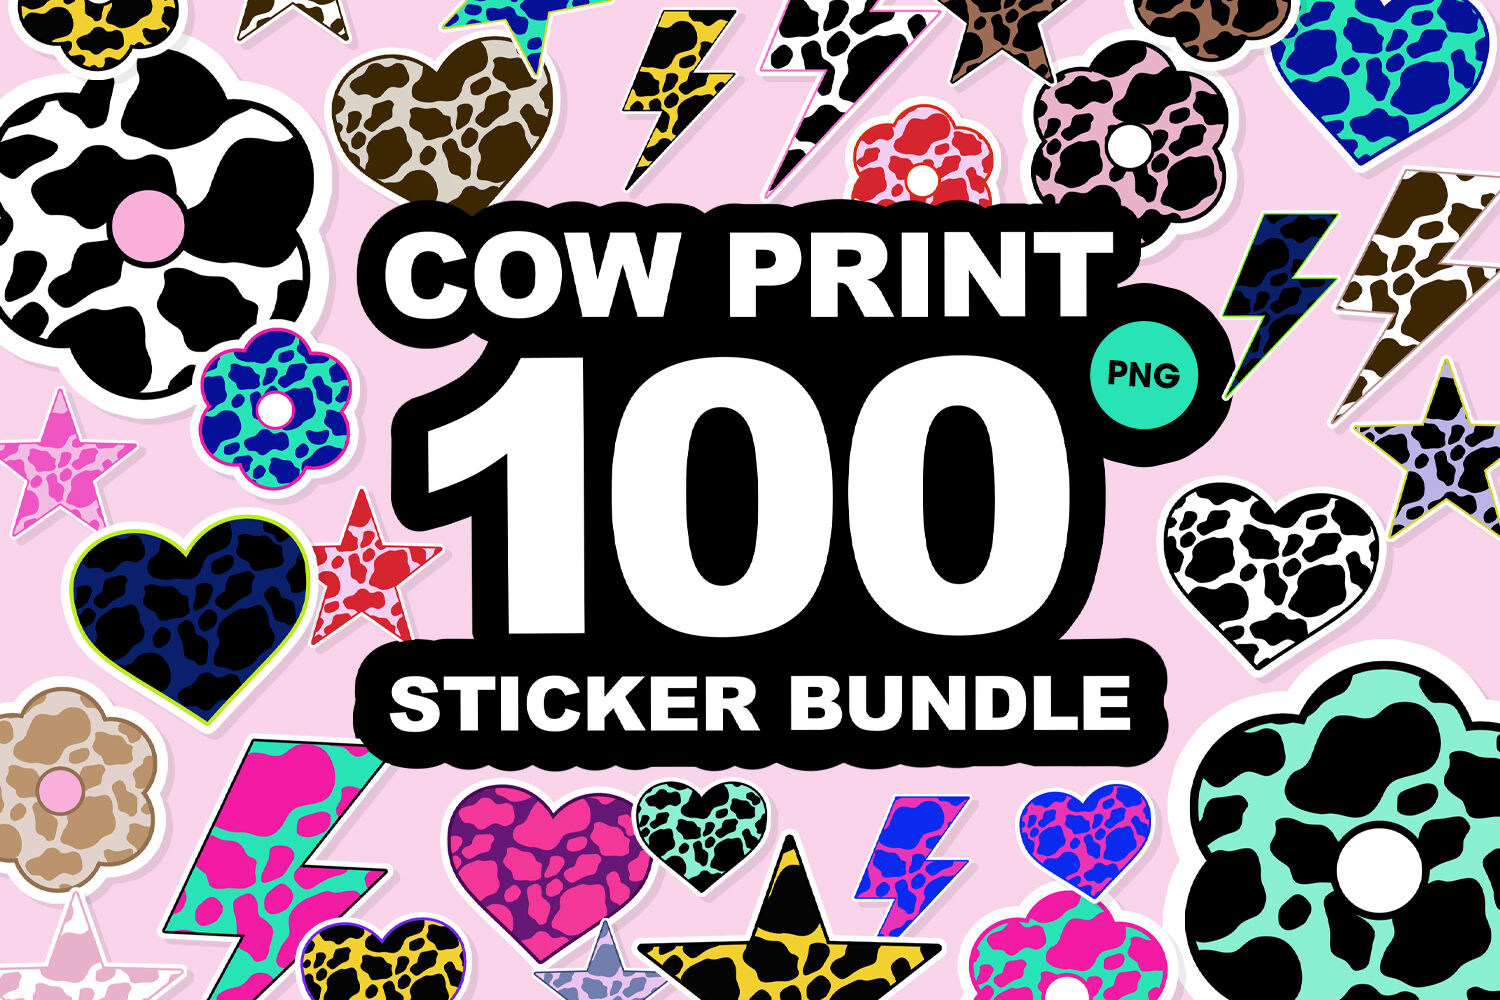 Cow print stickers, 90s stickers png By Digitartx